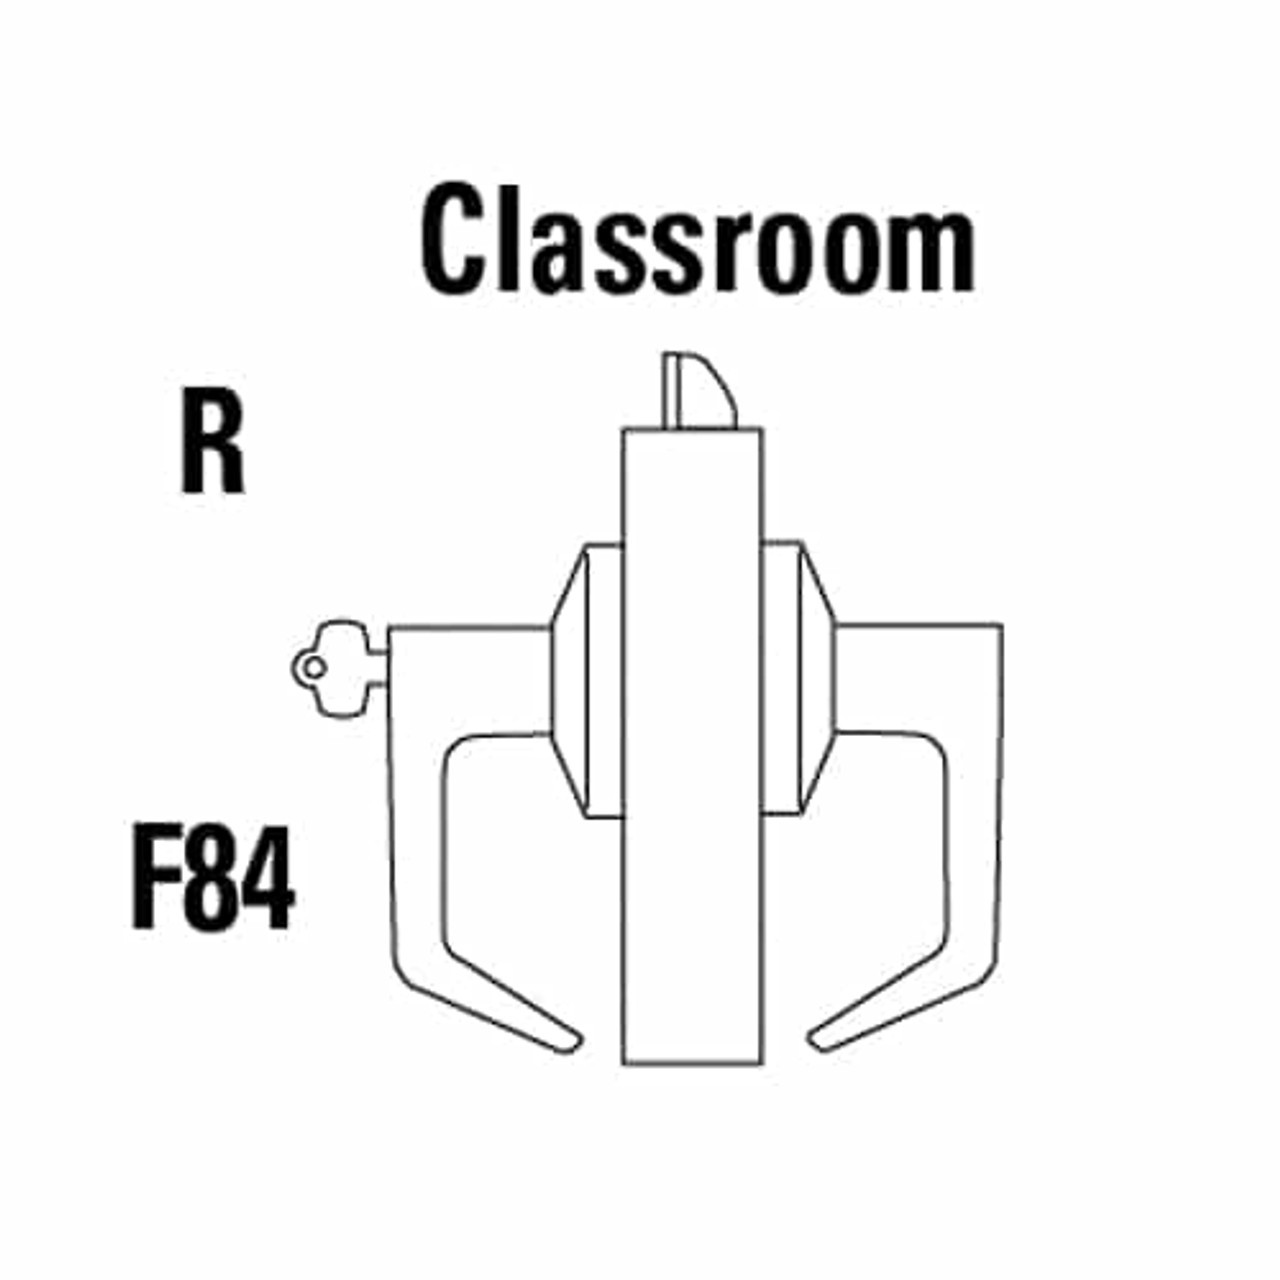 9K37R15LS3626LM Best 9K Series Classroom Cylindrical Lever Locks with Contour Angle with Return Lever Design Accept 7 Pin Best Core in Satin Chrome